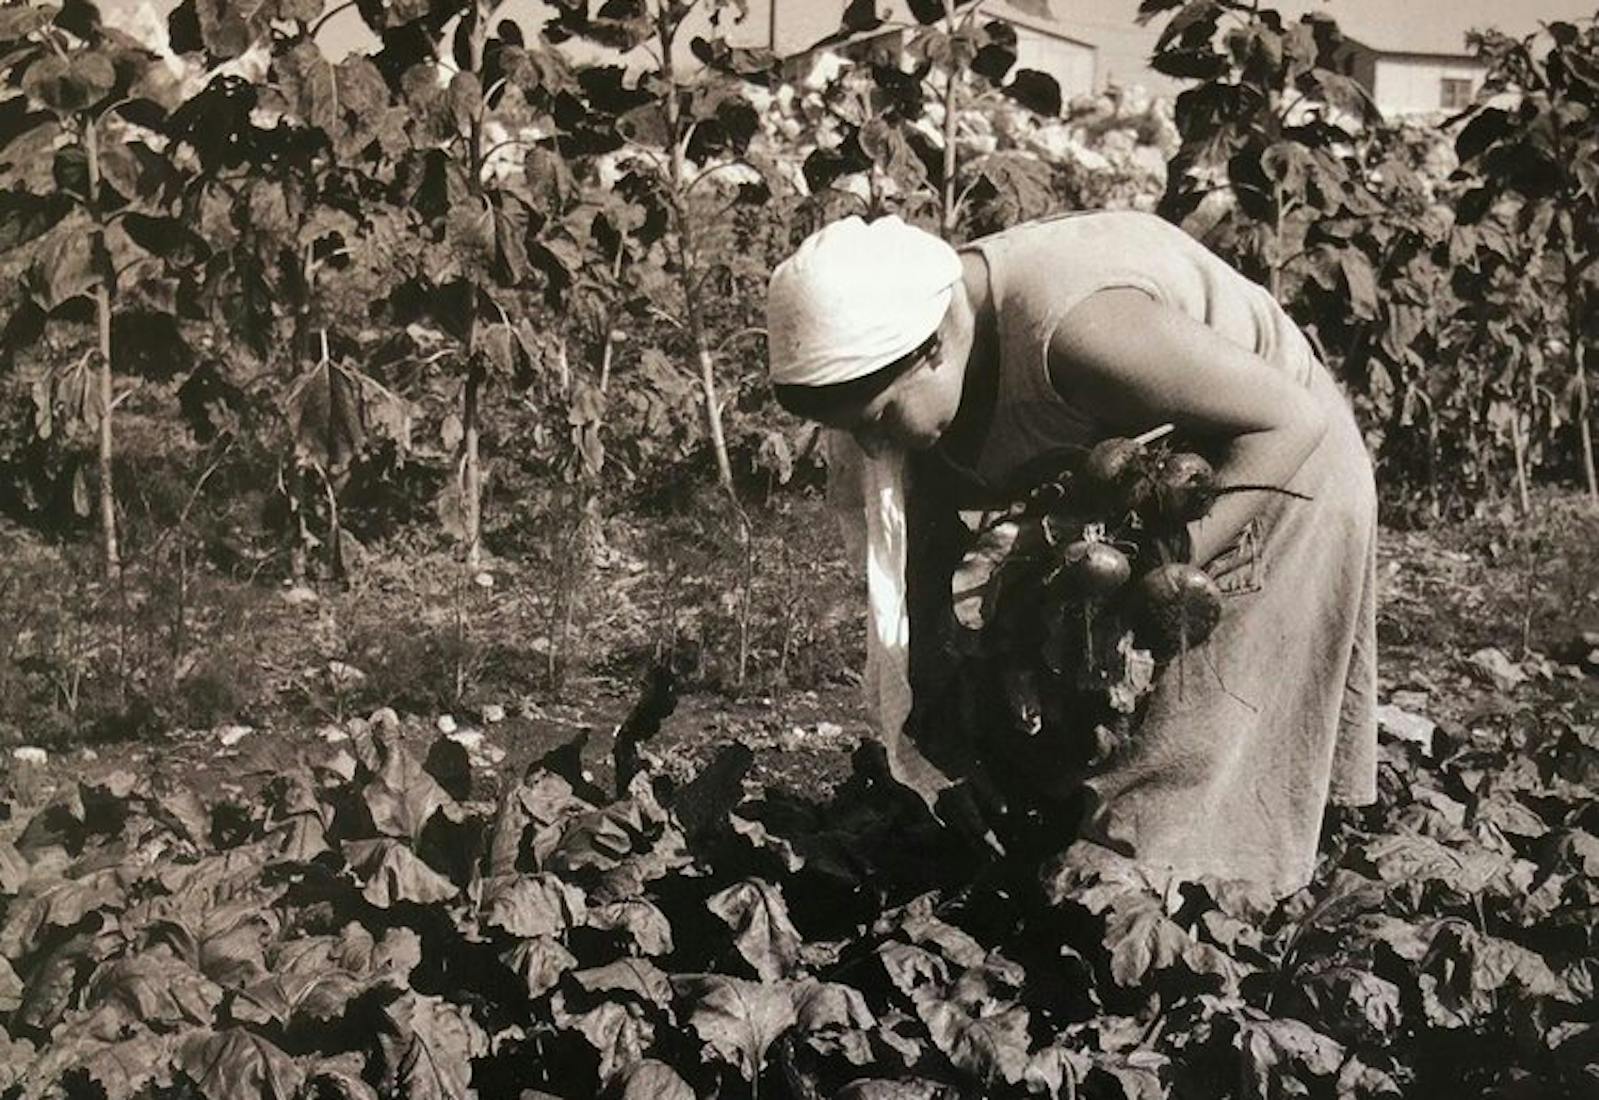 A local neighbor harvesting beets in Yodfat in 1984.